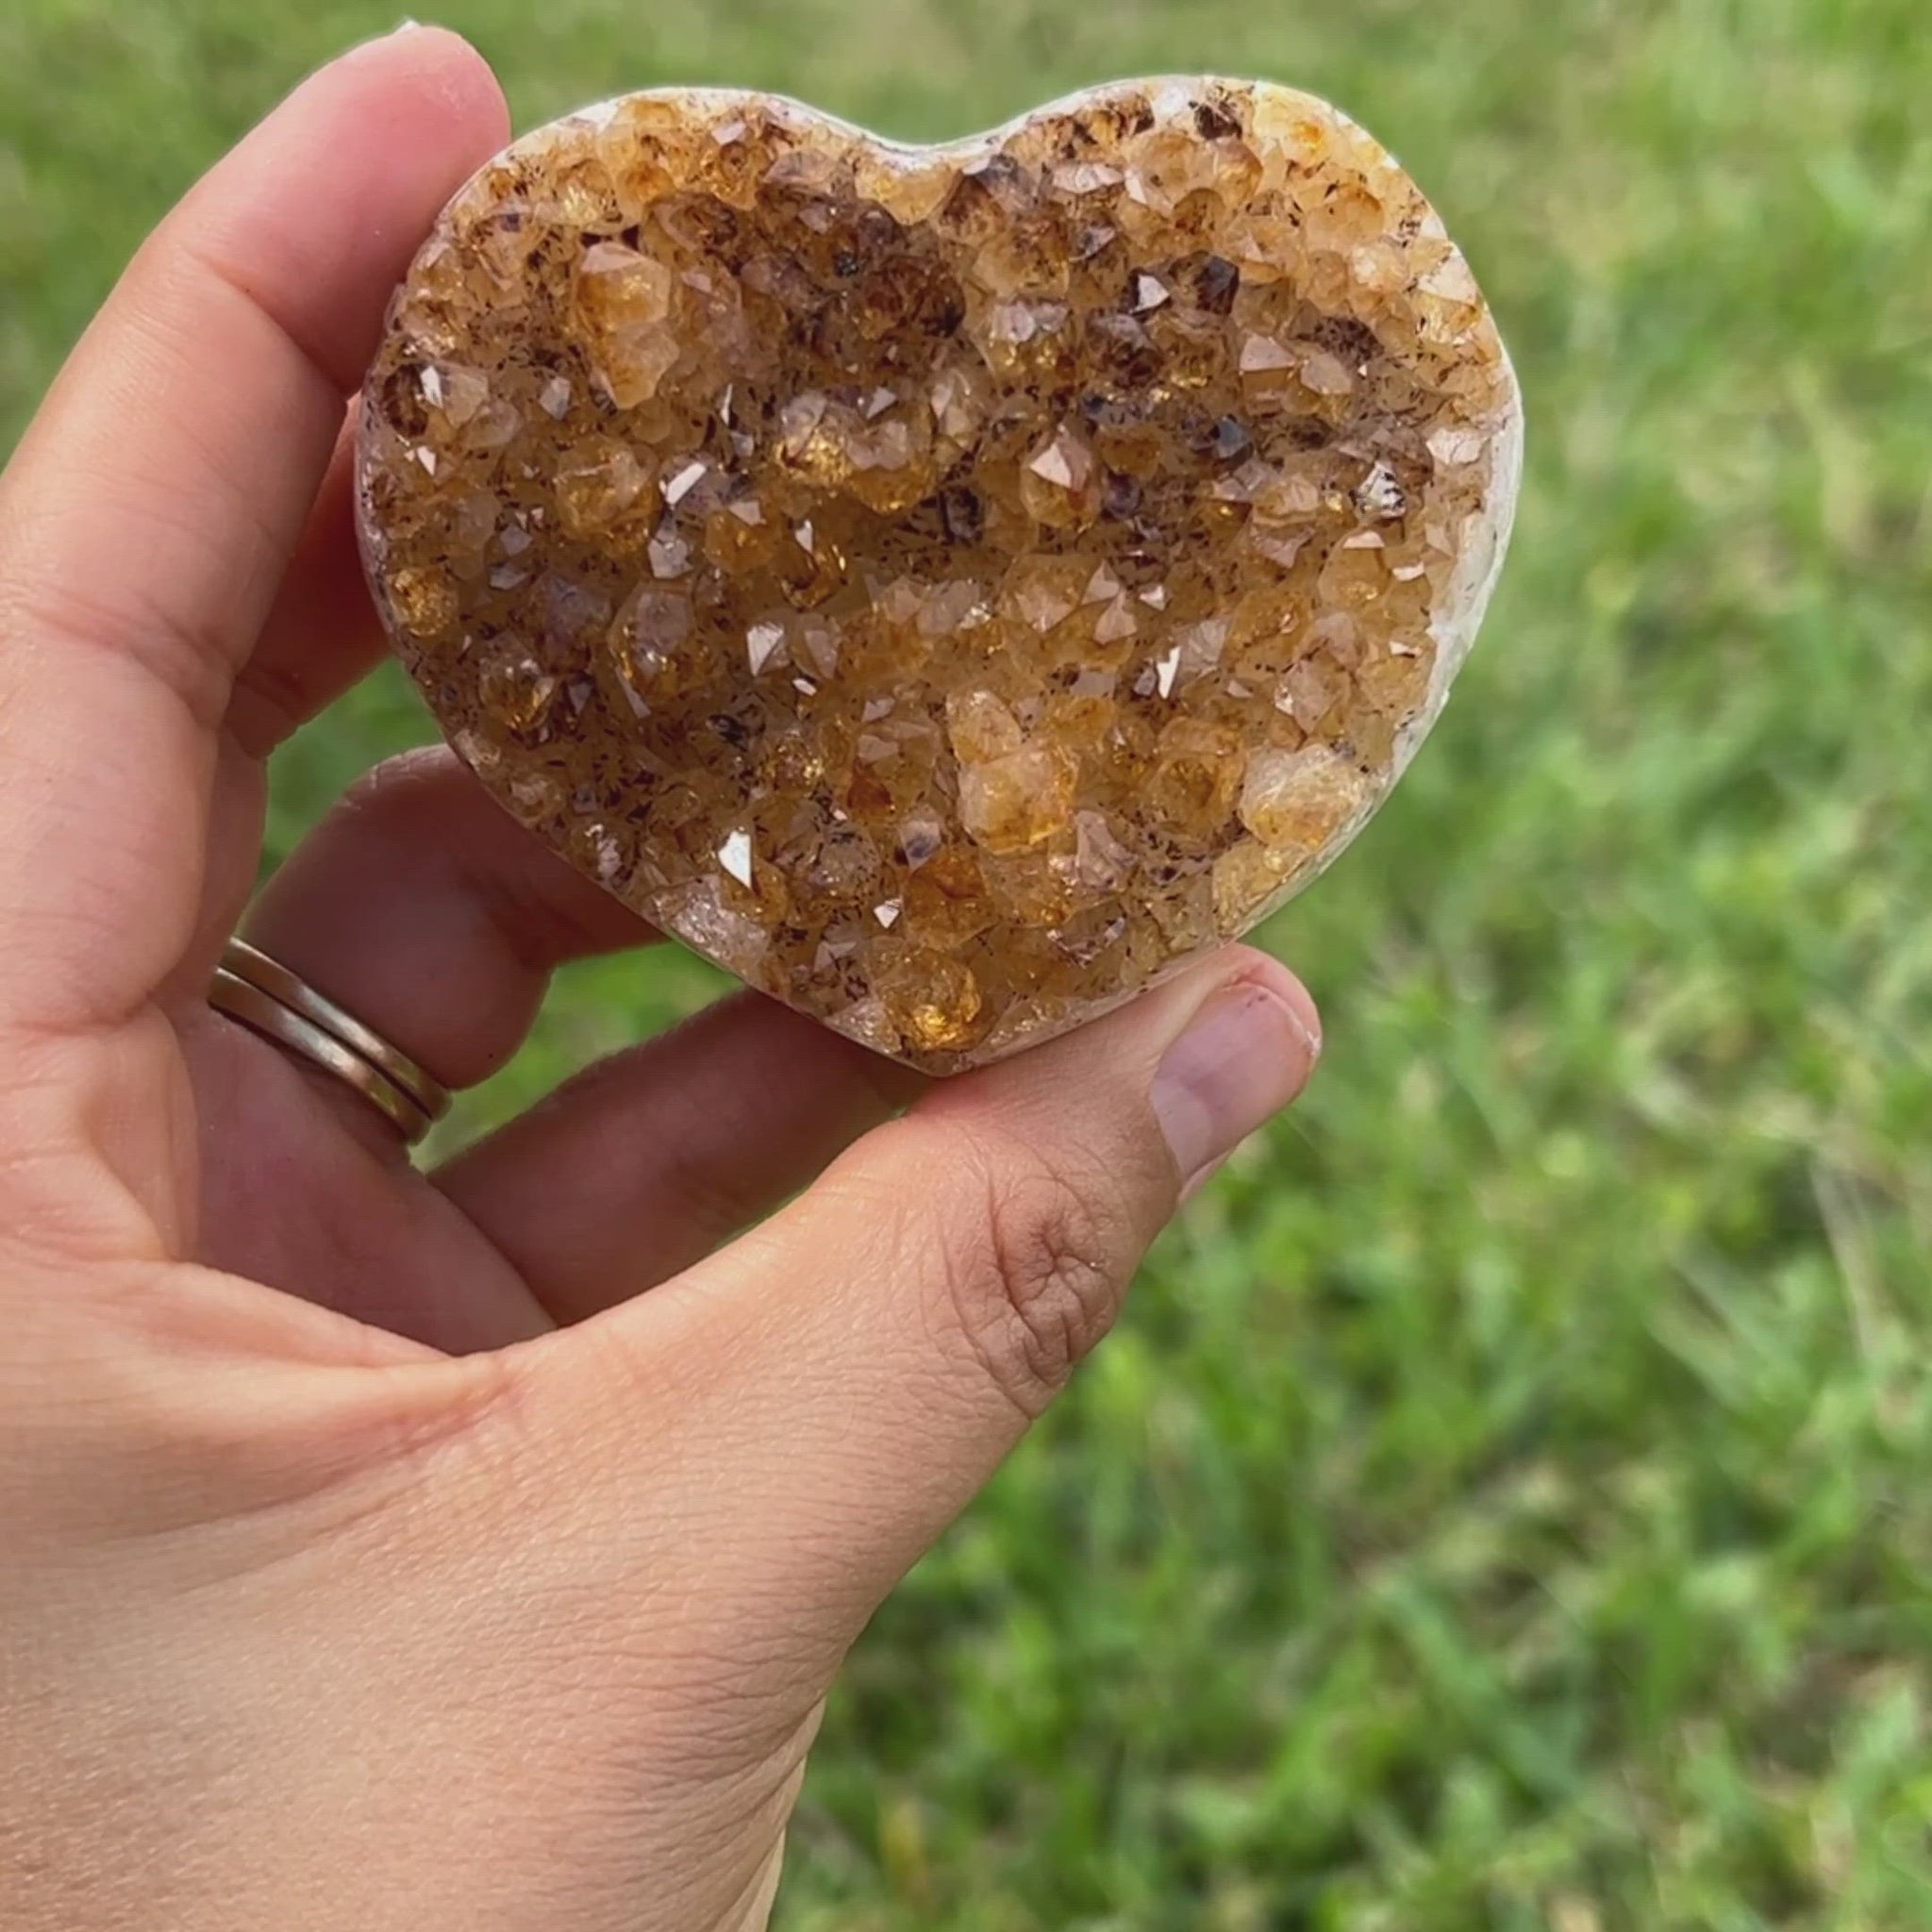 Citrine Druzy Heart Cluster. Citrine Crystal Cluster Heart Geode at Magic Crystals. Crystal Citrine Heart Cluster, Heart Citrine Crystal Cluster. Citrine Heart Druzy Crystal Cluster Geode Solar Plexus Stone Wealth Stone Citrine Crystal. Gemstone Carving Heart. FREE SHIPPING available.